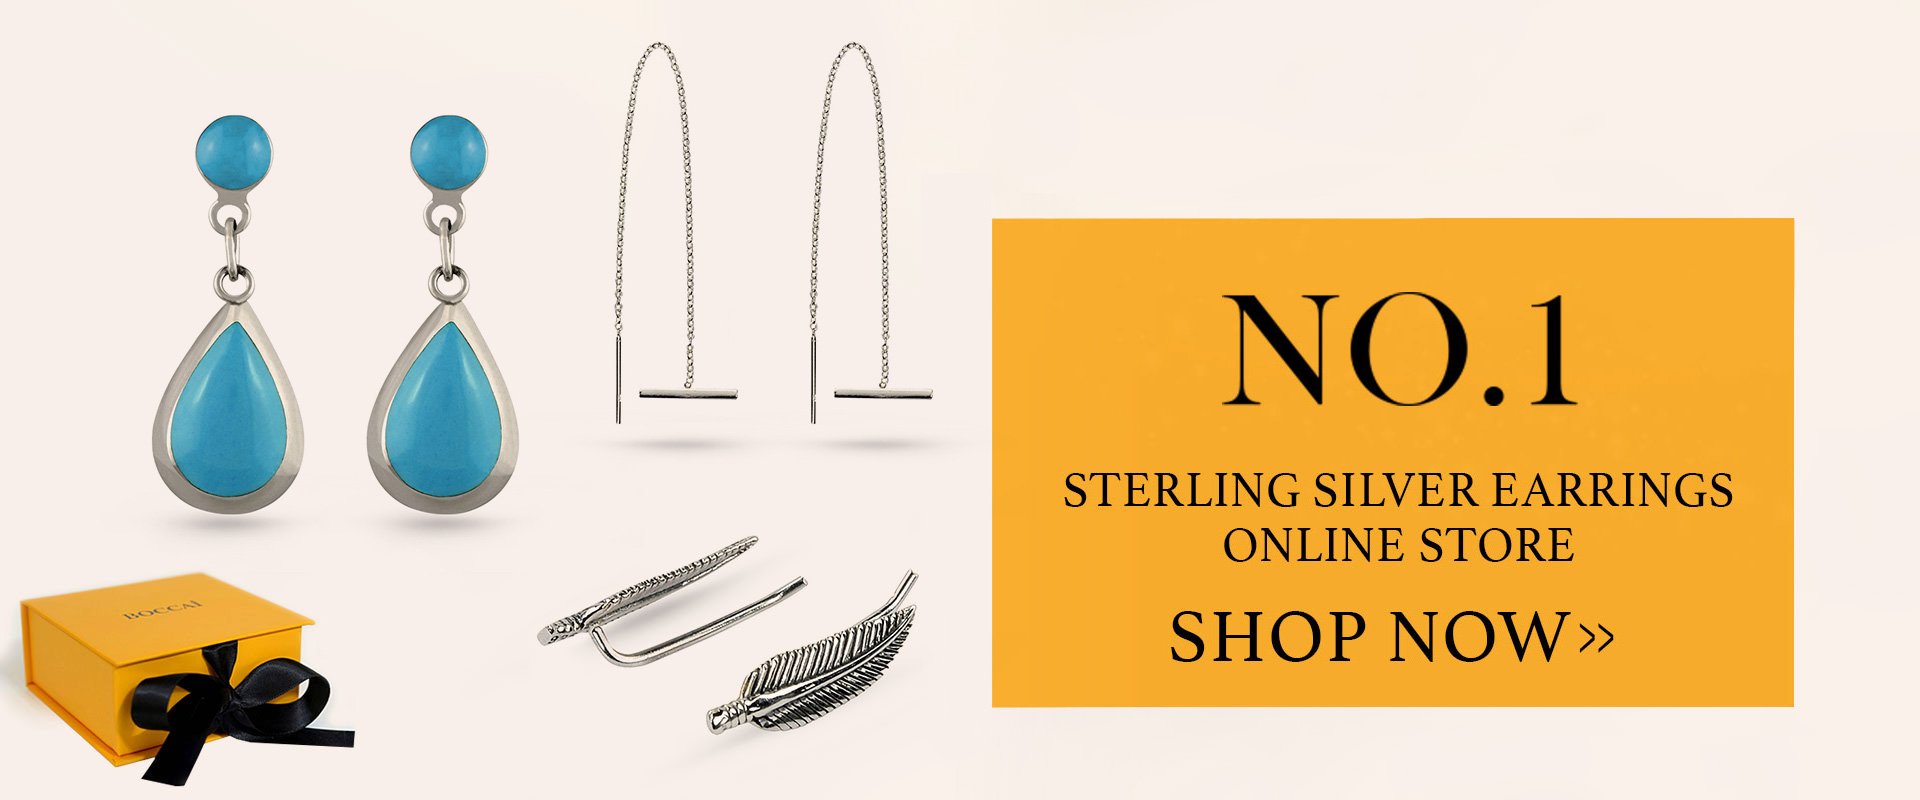 Boccai No.1 Sterling Silver Earrings Online Store